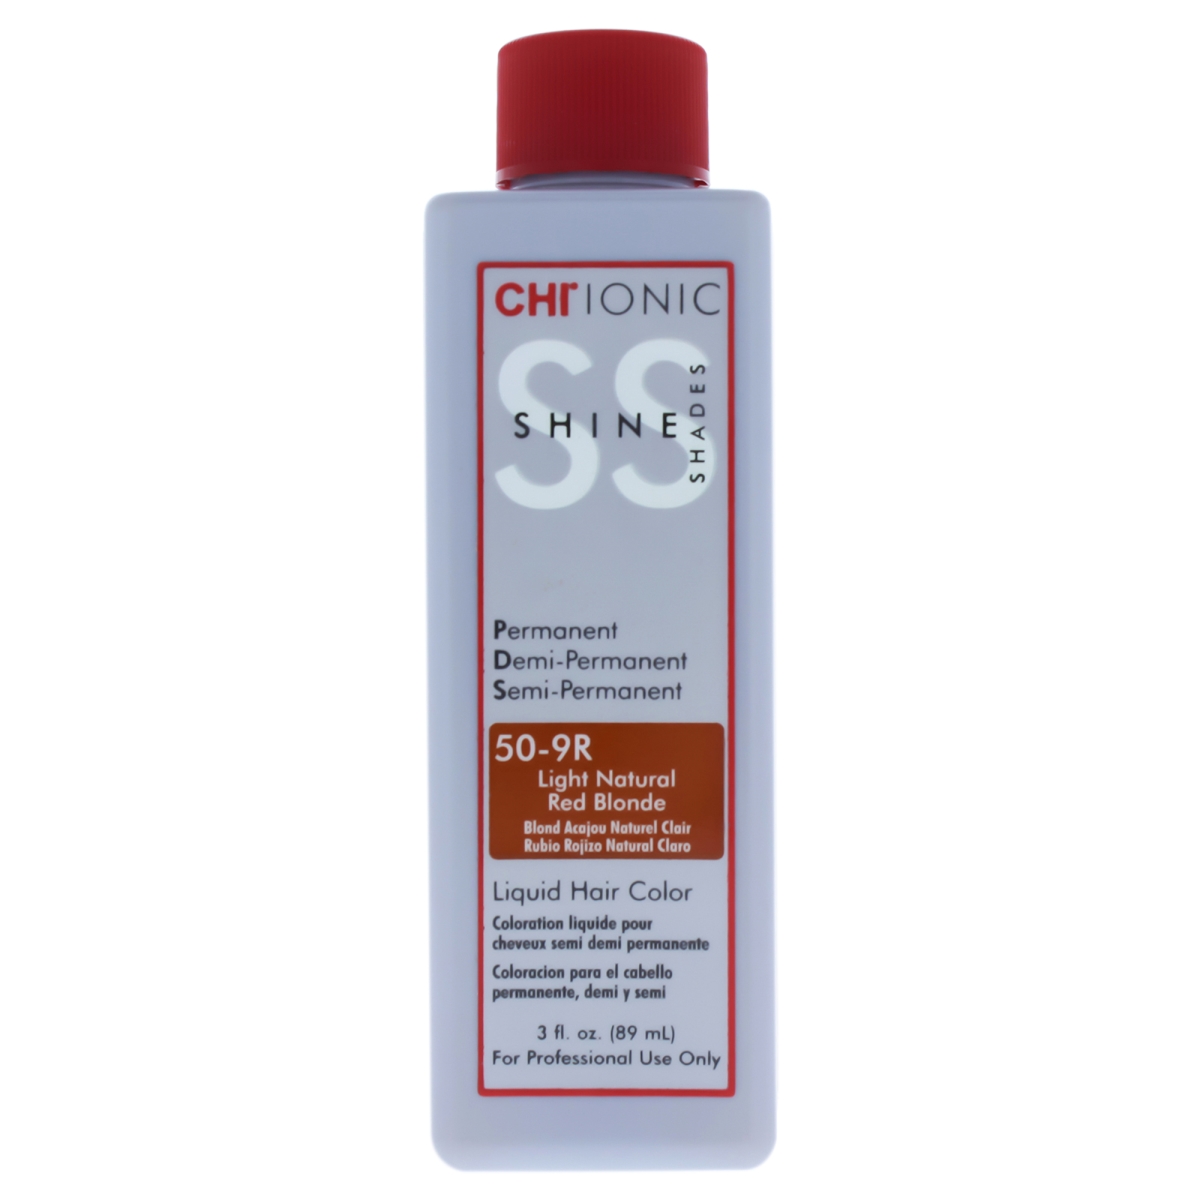 I0084025 Ionic Shine Shades Liquid Hair Color For Unisex - 50-9r Light Natural Red Blonde - 3 Oz